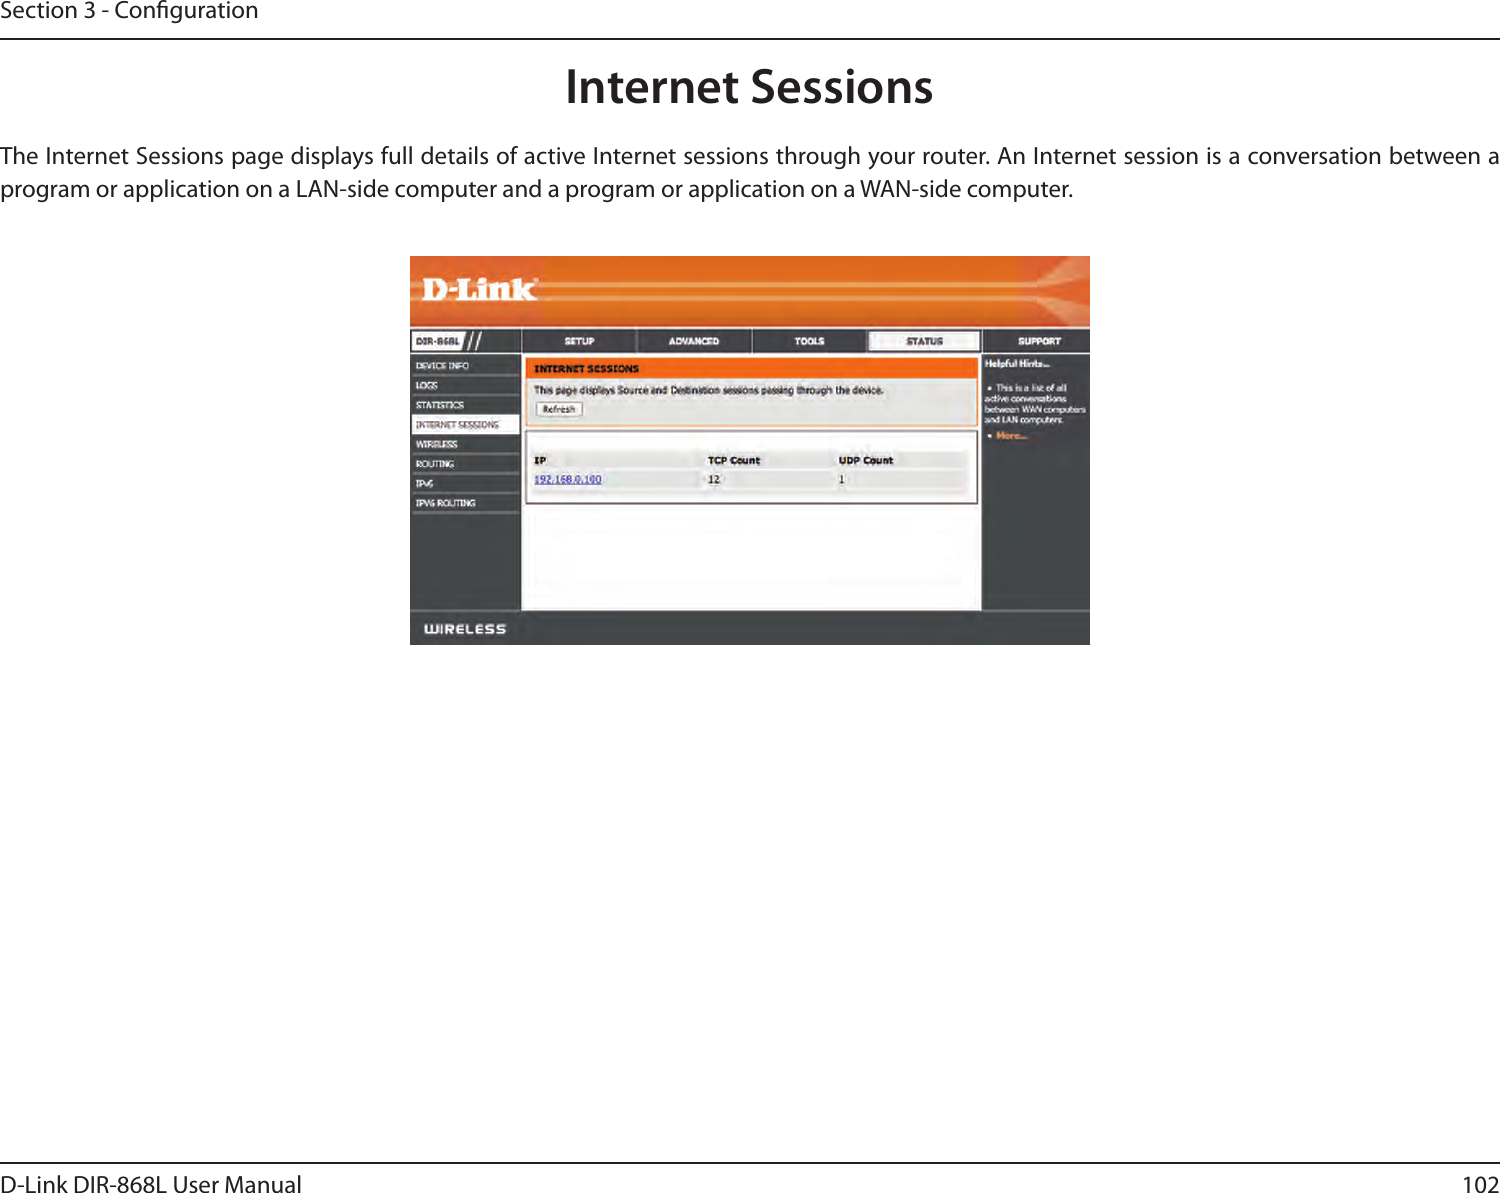 102D-Link DIR-868L User ManualSection 3 - CongurationInternet SessionsThe Internet Sessions page displays full details of active Internet sessions through your router. An Internet session is a conversation between a program or application on a LAN-side computer and a program or application on a WAN-side computer. 